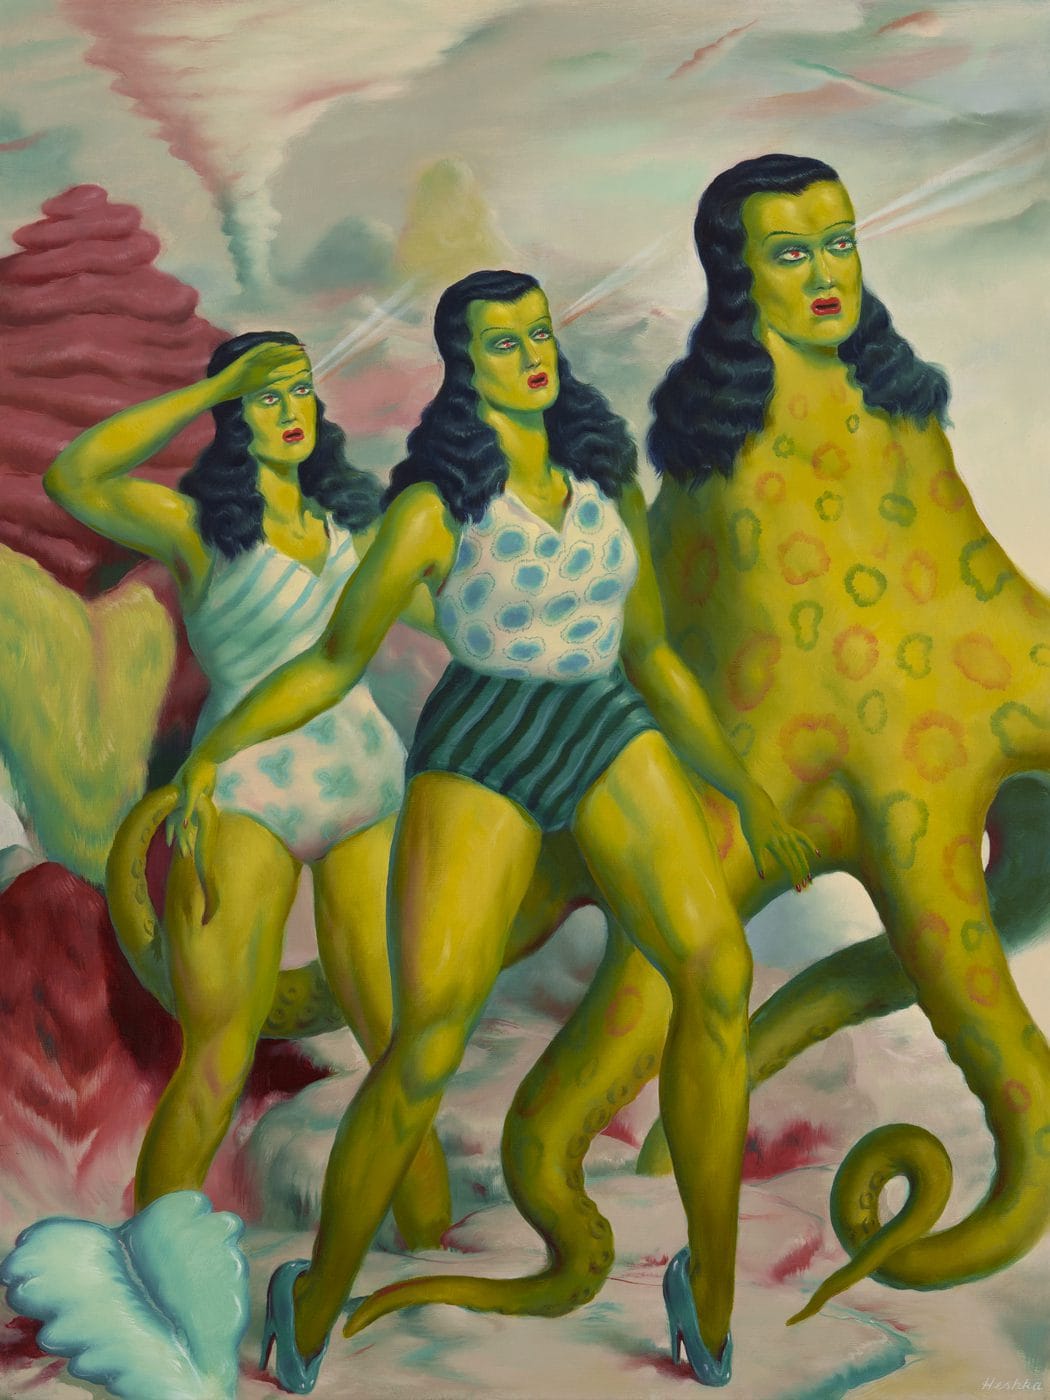 Ryan Heshka. “Witches of the Weeds” (oil on canvas, 24” x 18”)